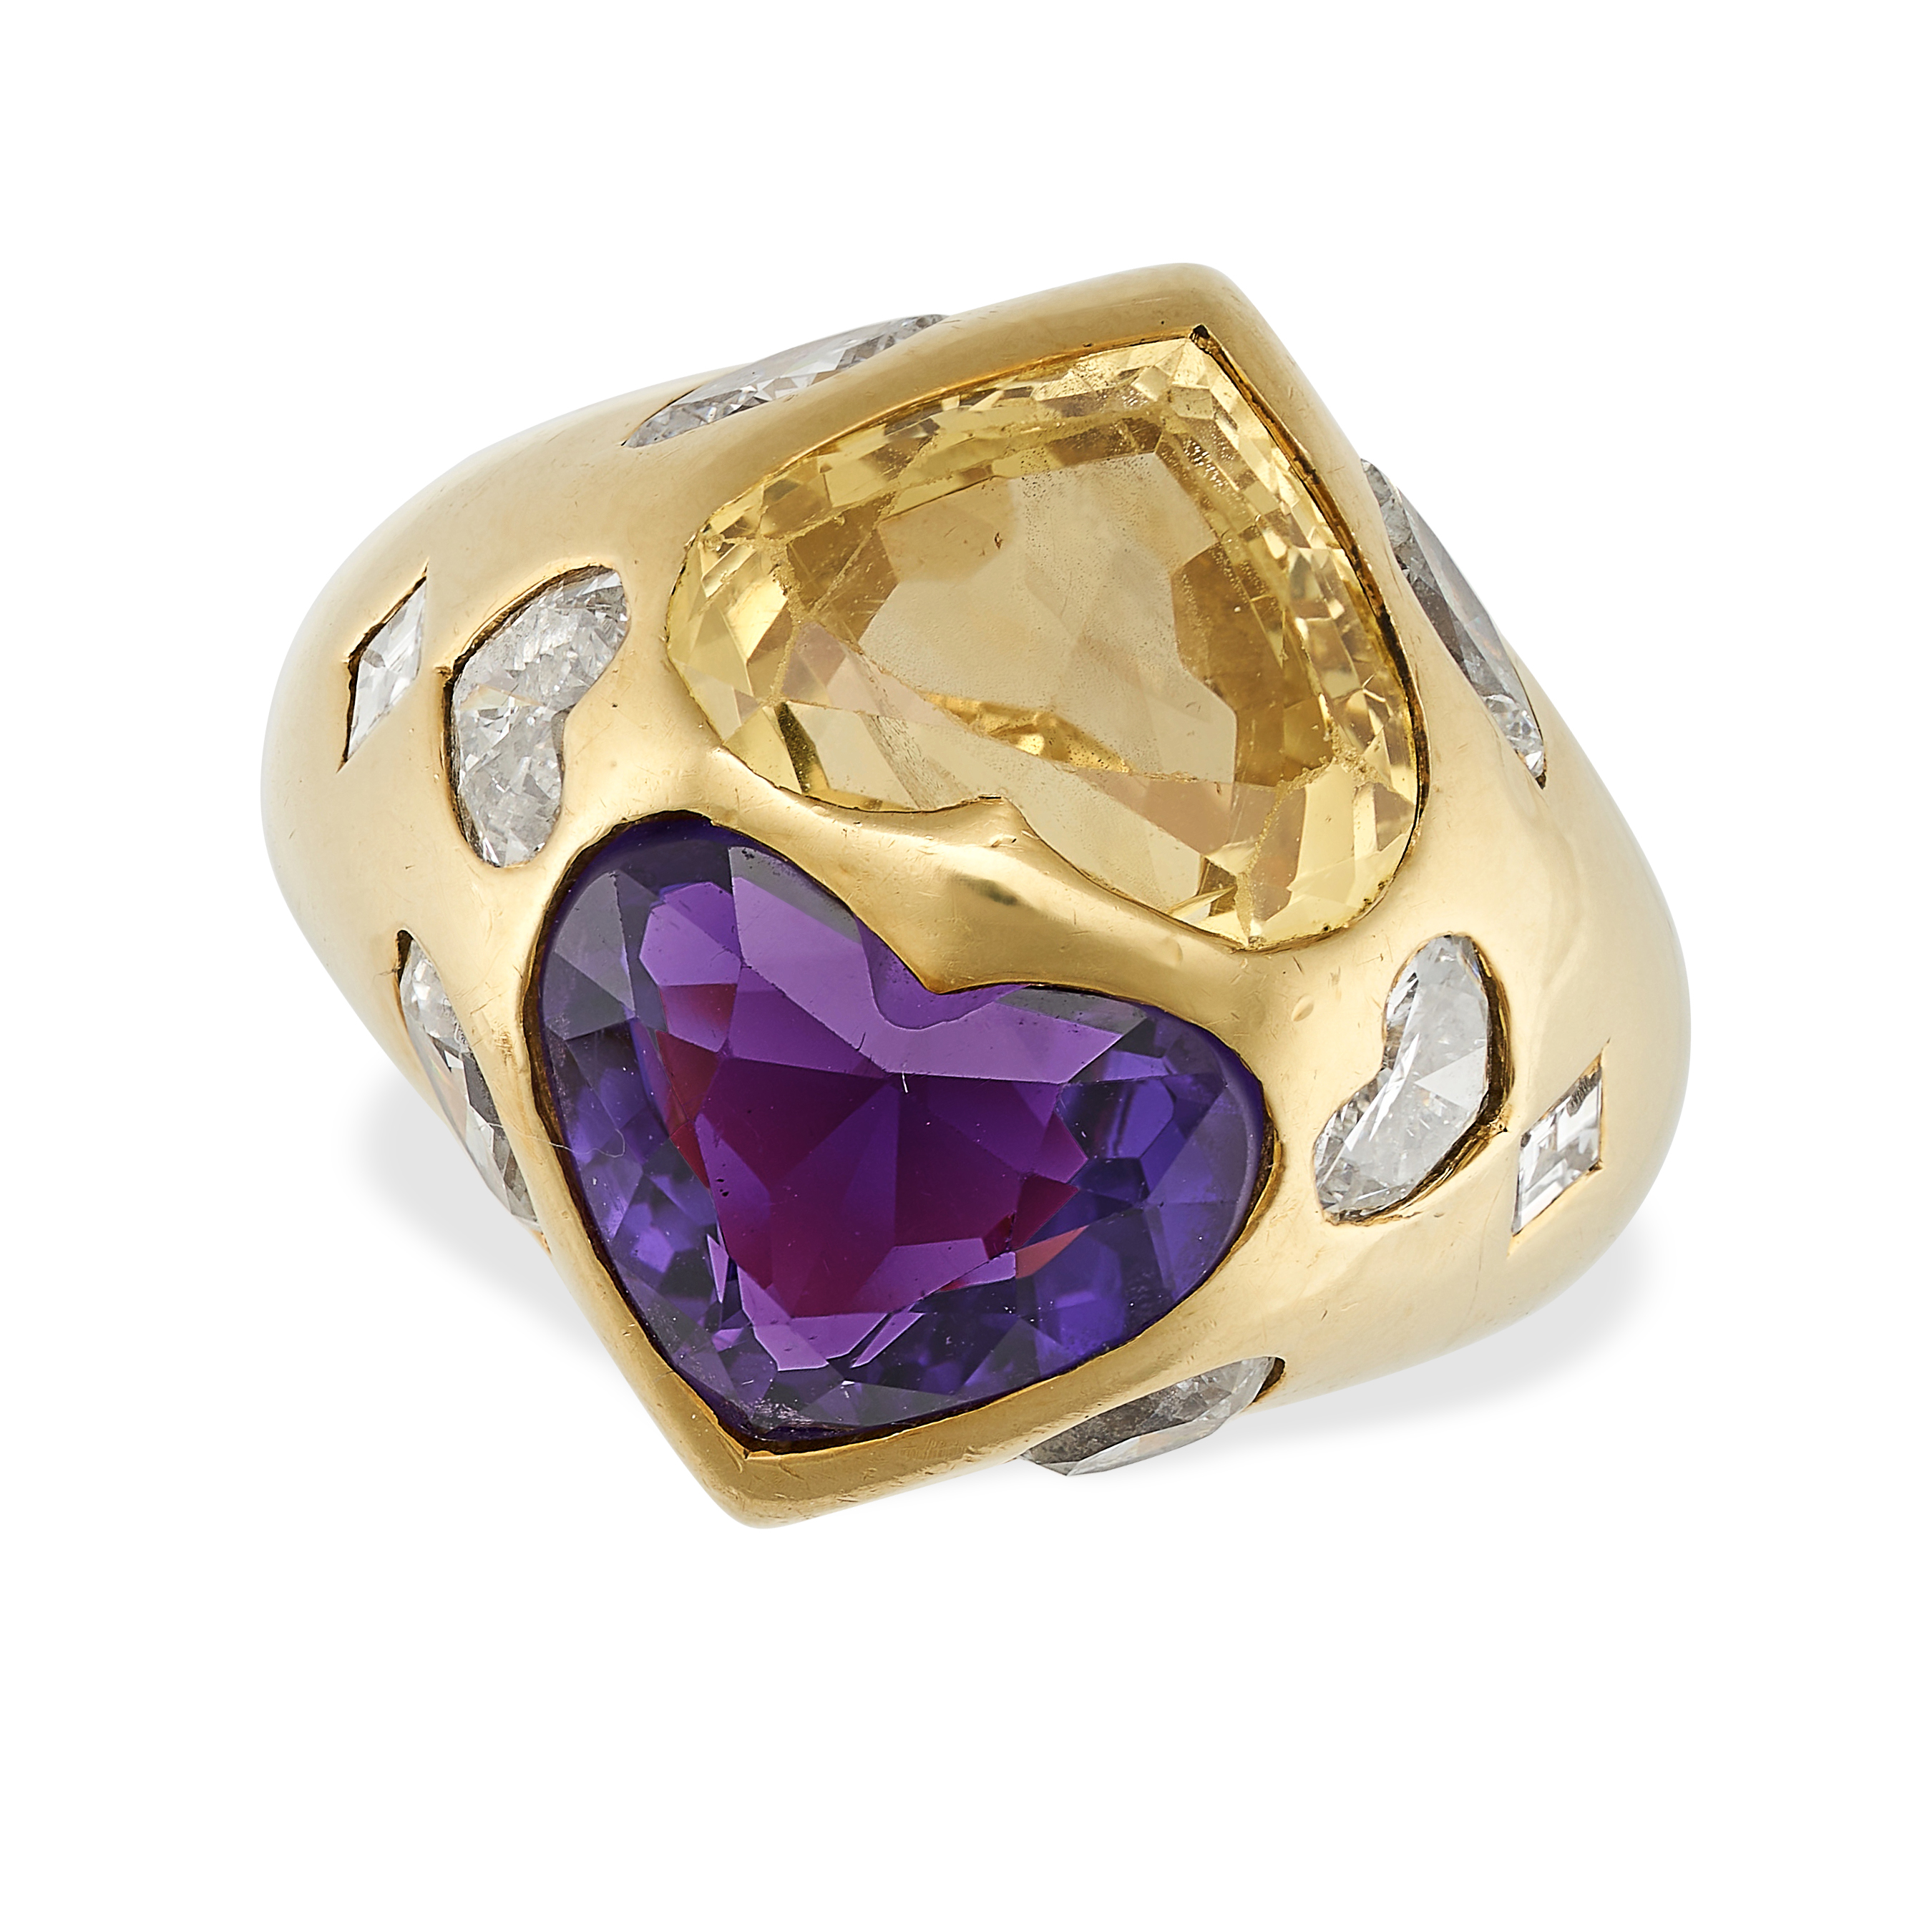 AN UNHEATED YELLOW SAPPHIRE, AMETHYST AND DIAMOND DRESS RING in 18ct yellow gold, the domed face set